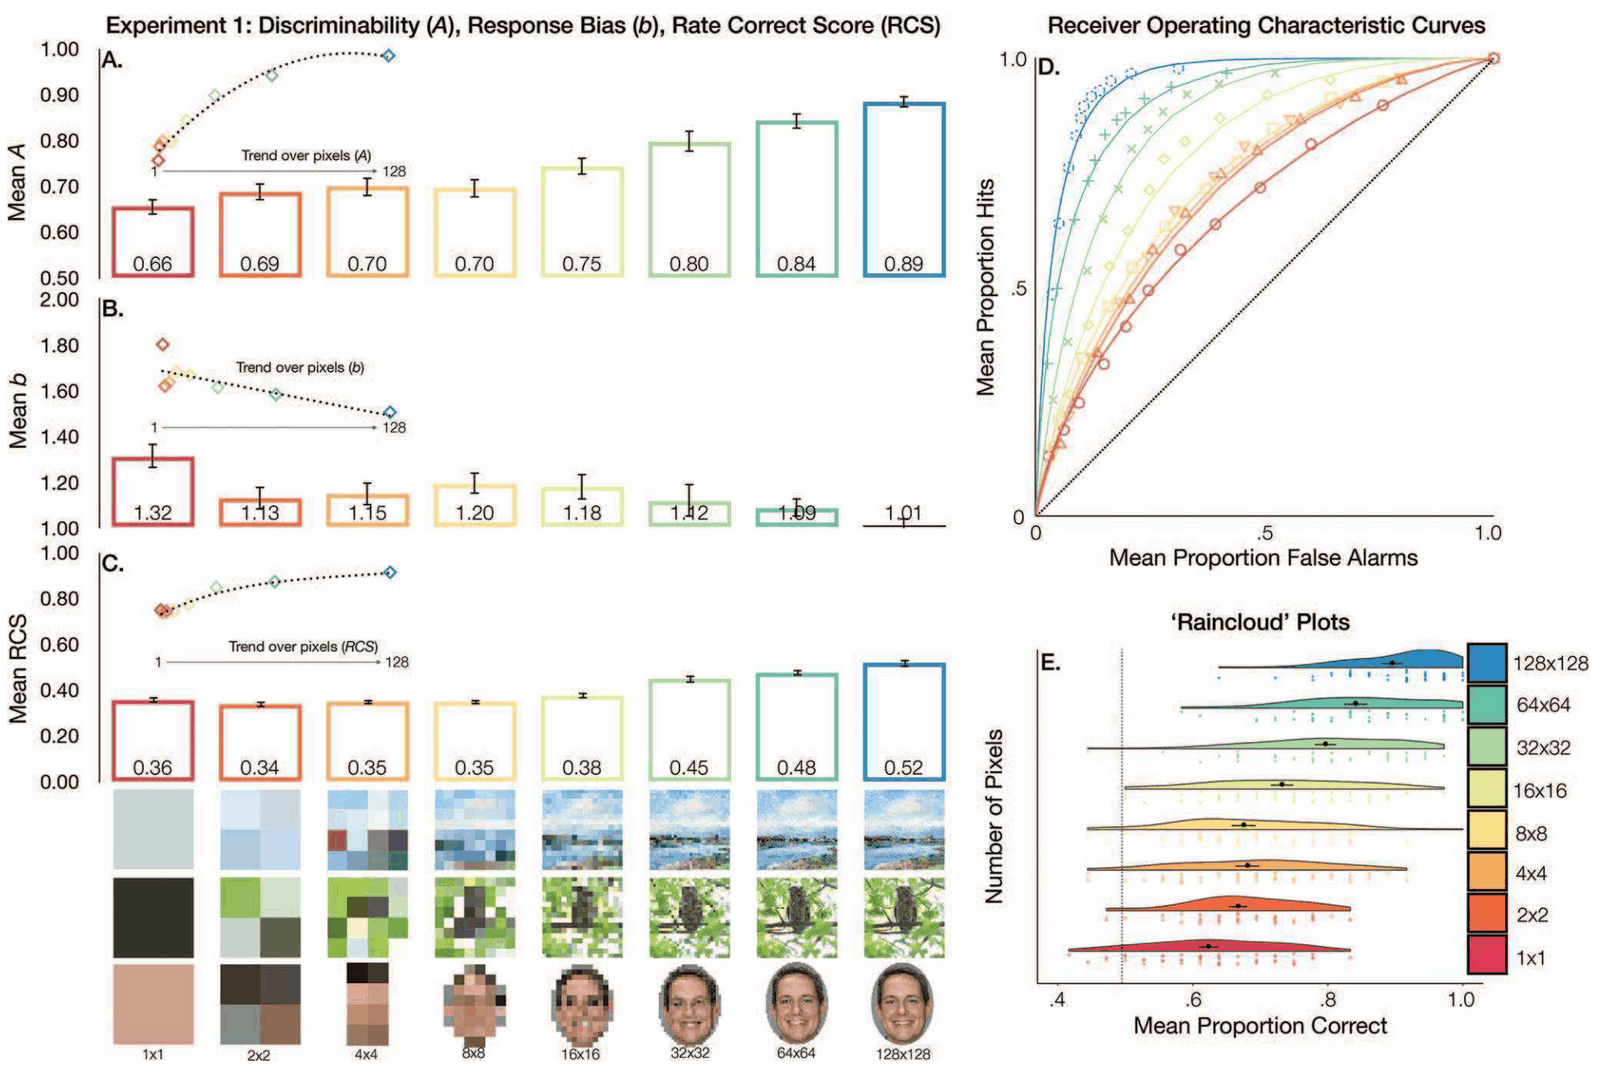 Figure 2: Panels A, B, and C depict participants’ mean discriminability (A), response bias (b), and rate correct scores (in seconds) recognition memory task as a function of image resolution (x-axes), along with their polynomial trend over pixels at the top of the 3 panels. All plots represent the 50 participants’ responses, collapsing over the 3 domains: paintings, birds, and faces. Panel D shows the receiver operating characteristic curves for the 8 image resolutions, overlaid with the “best-fitting” curve assuming binomial distributions (the dotted line indicates chance performance). Finally, the raincloud plots in Panel E depict a half violin plot of participants’ mean proportion correct scores across the 8 image resolutions overlaid with jittered data points from each individual participant, the mean proportion correct per resolution (the black dot), and standard error of the mean per resolution.